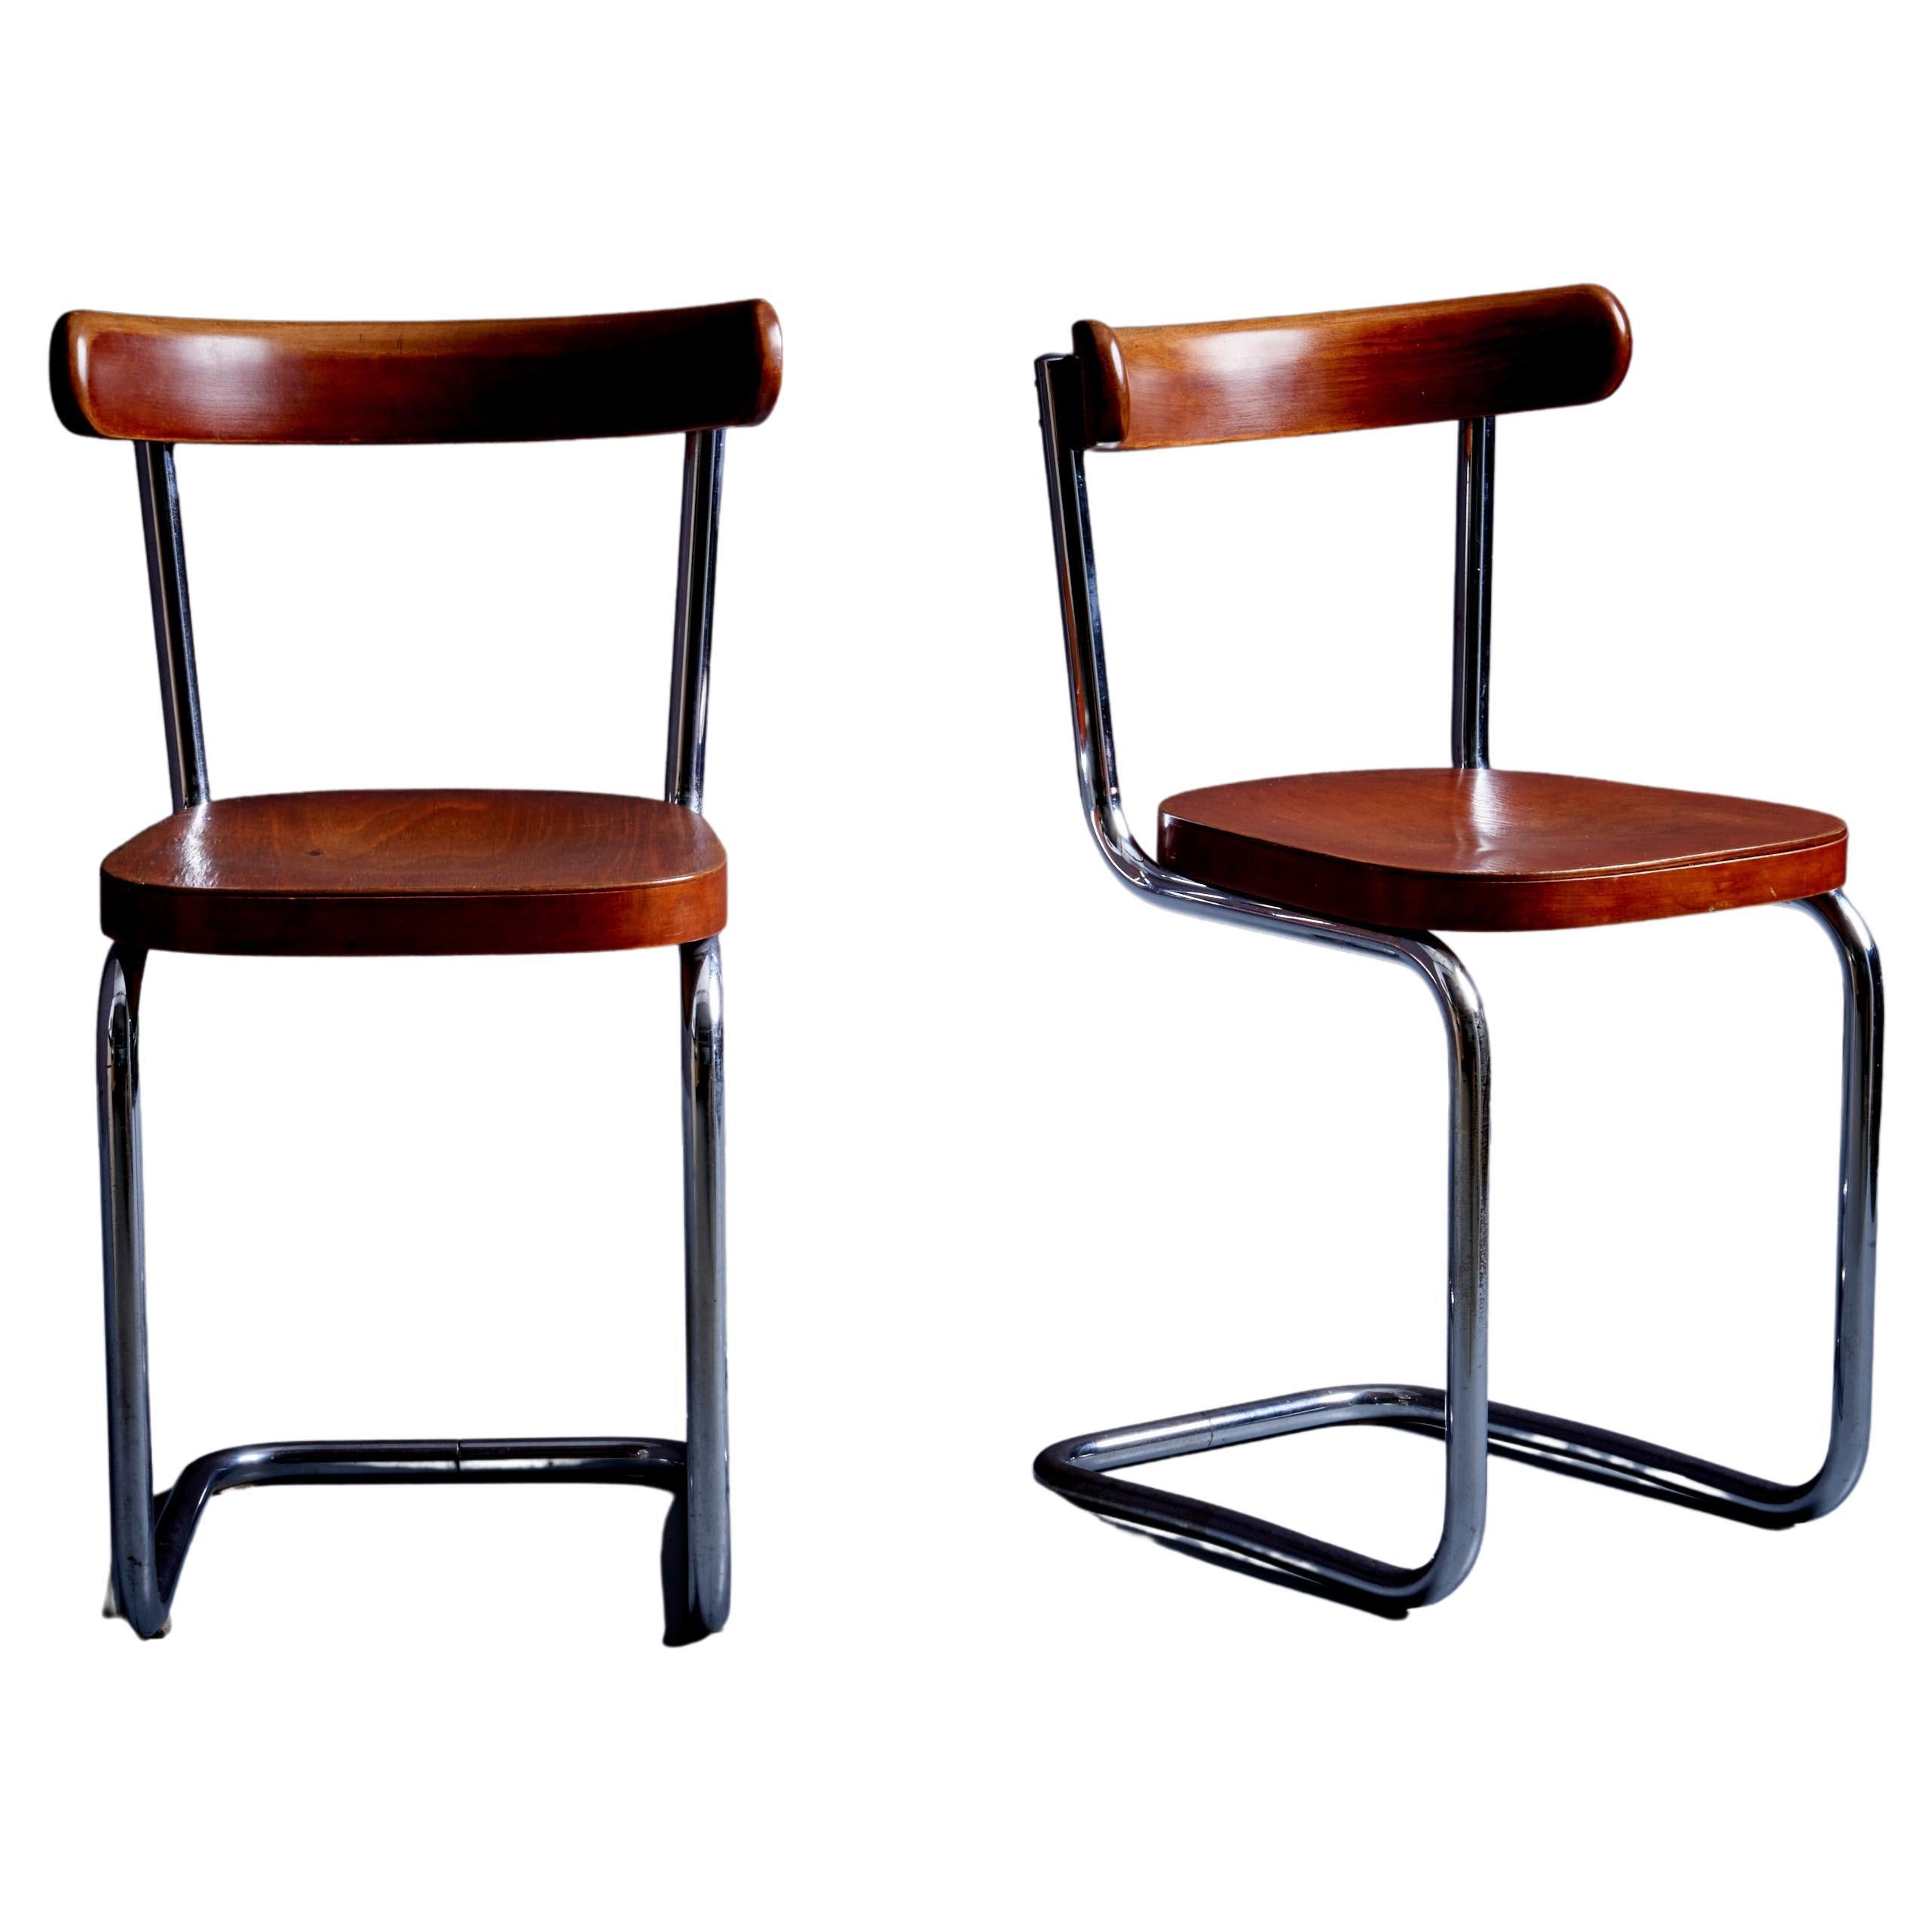 Pair of Chairs by Mart Stam for Mücke-Melder 'Under License from Thonet', 1930s For Sale